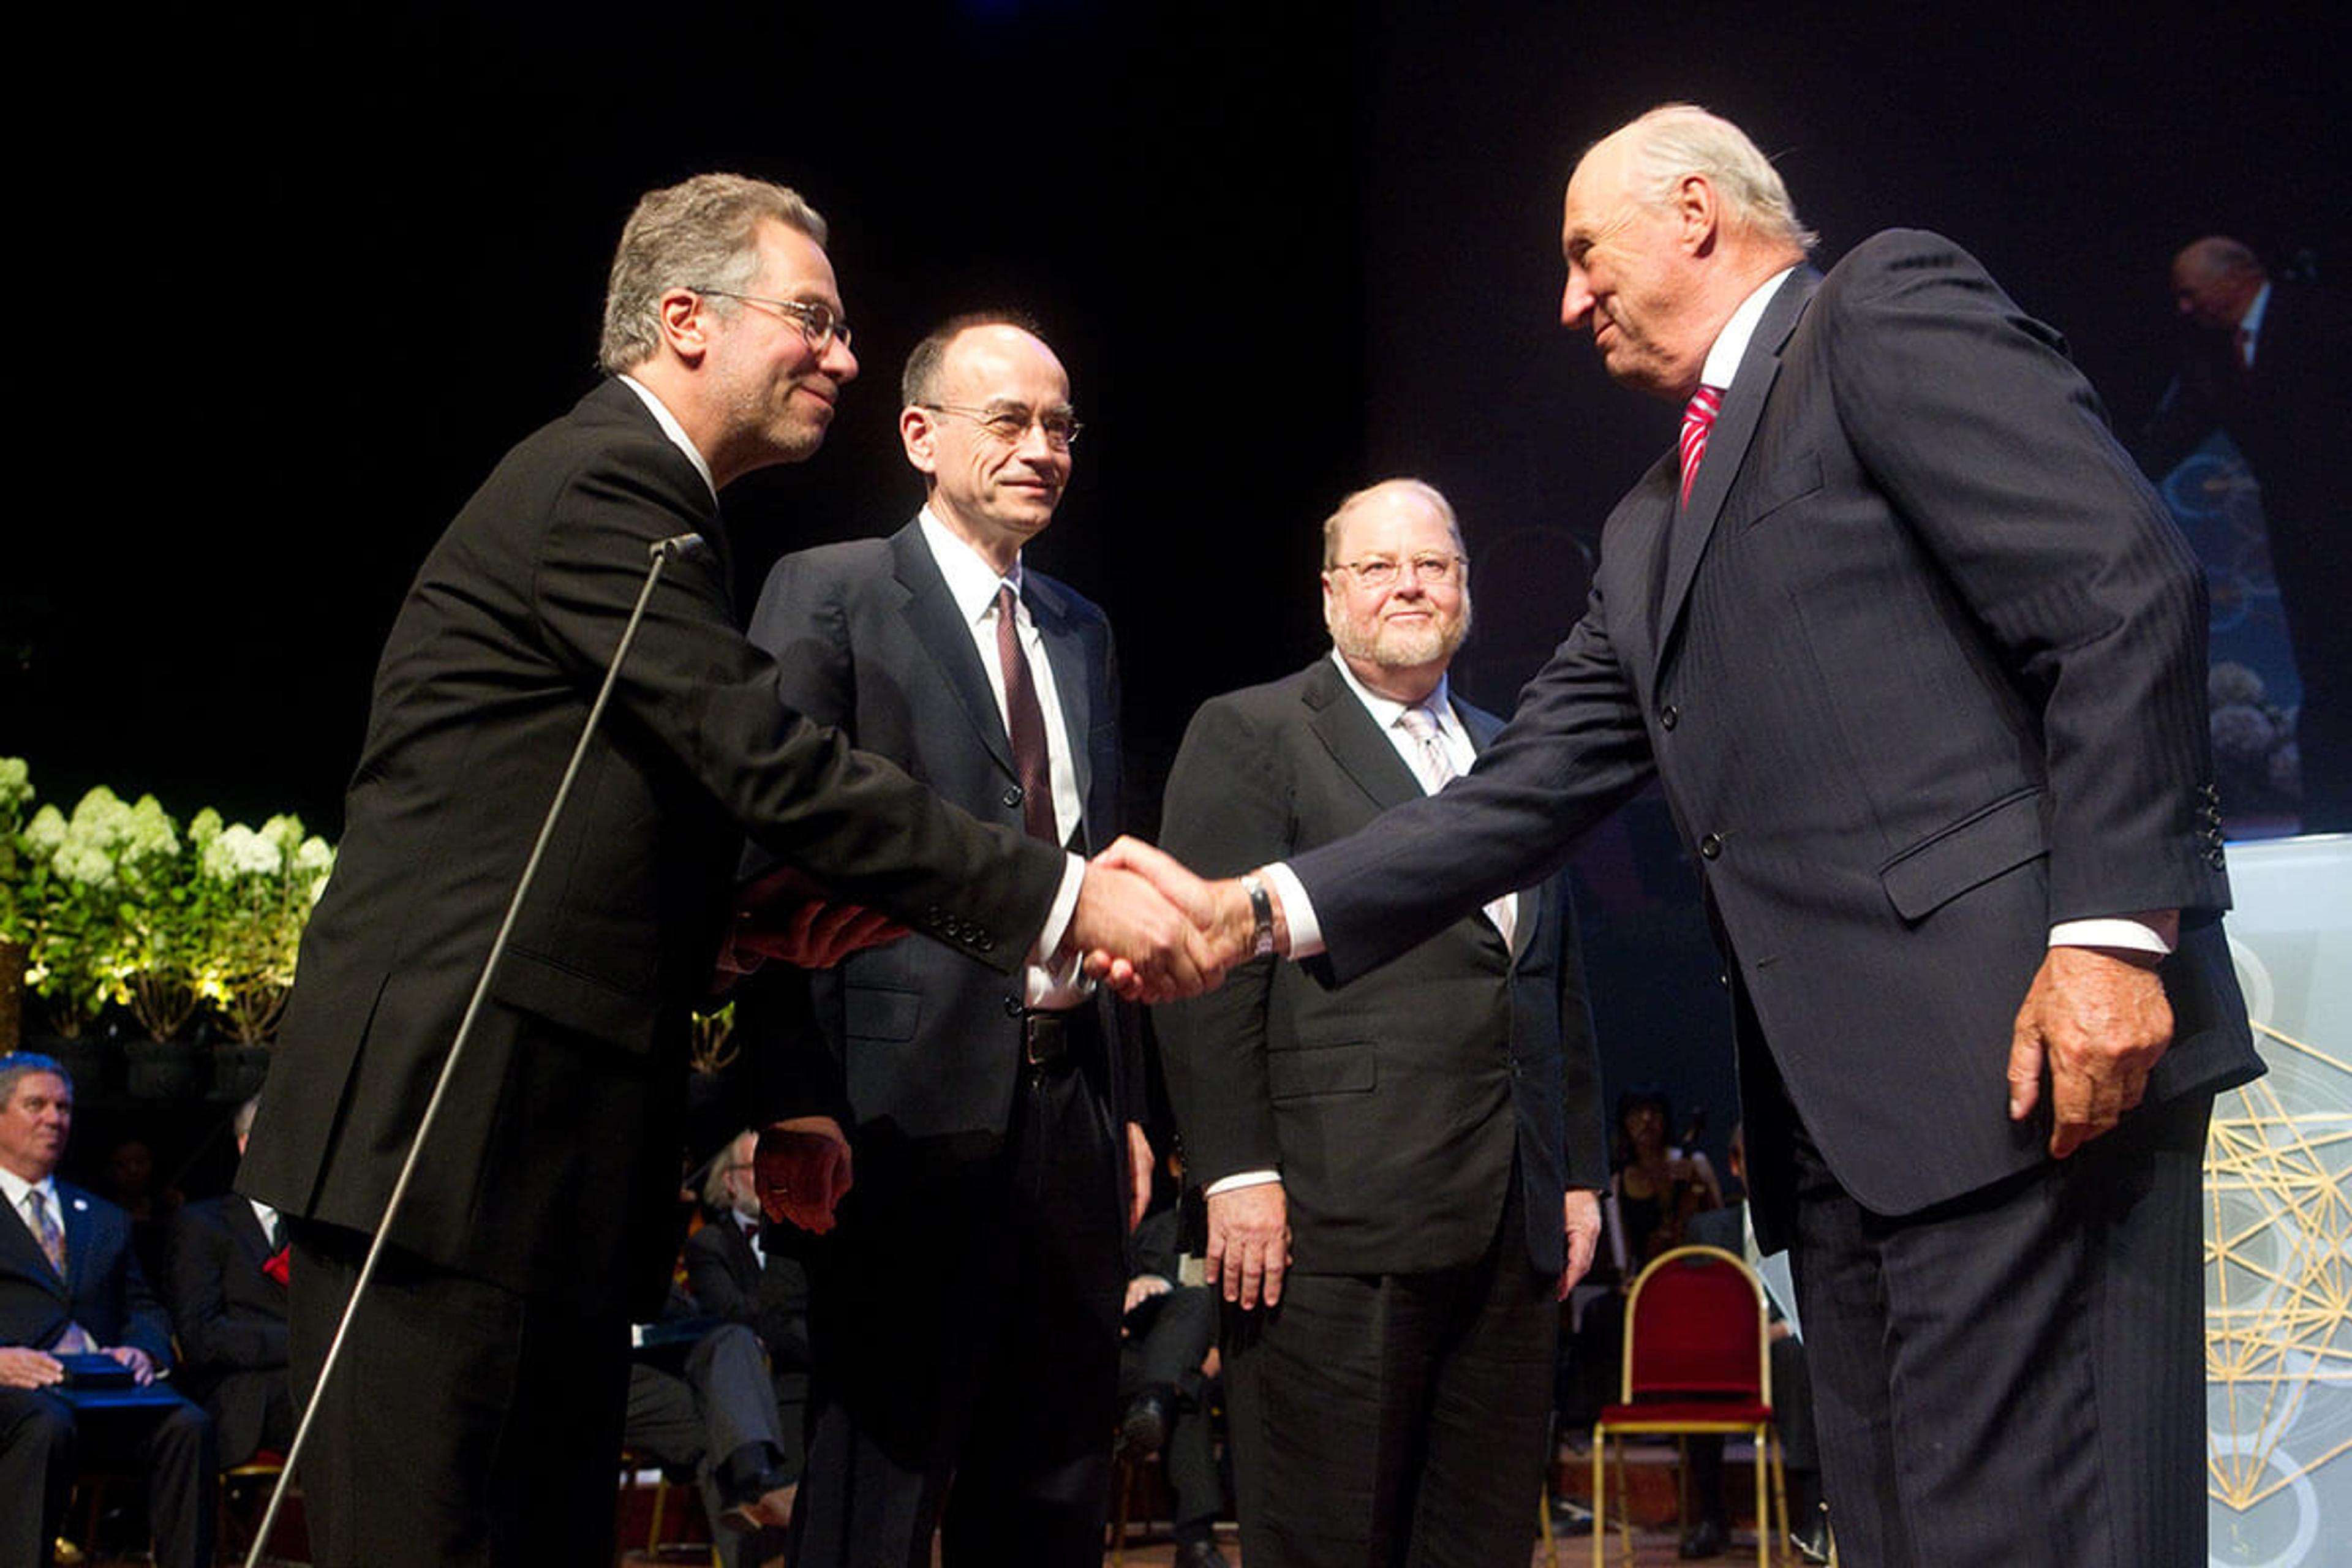 His Majesty King Harald of Norway presents the Kavli Prize in Neuroscience. 